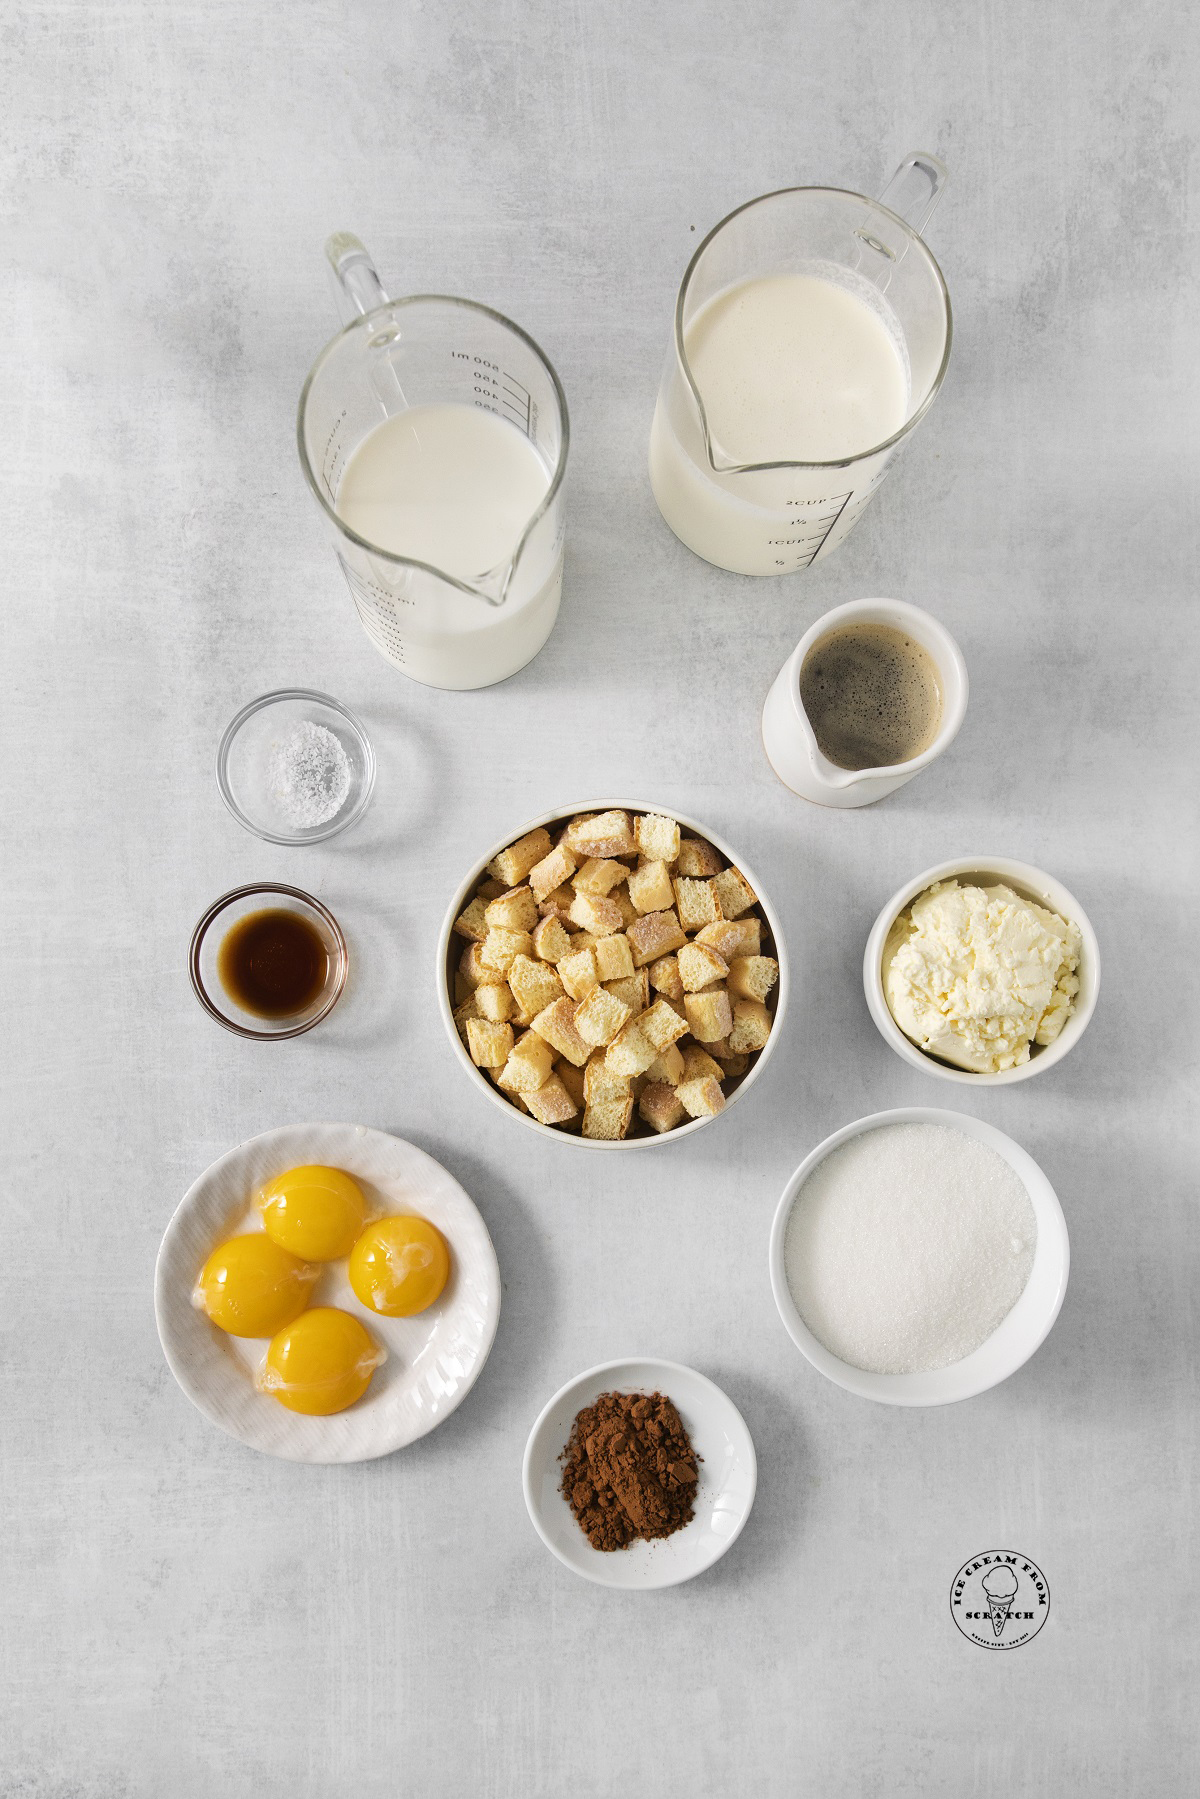 The ingredients needed to make homemade tiramisu ice cream, all in separate bowls and pitchers, arranged on a counter, and viewed from overhead.